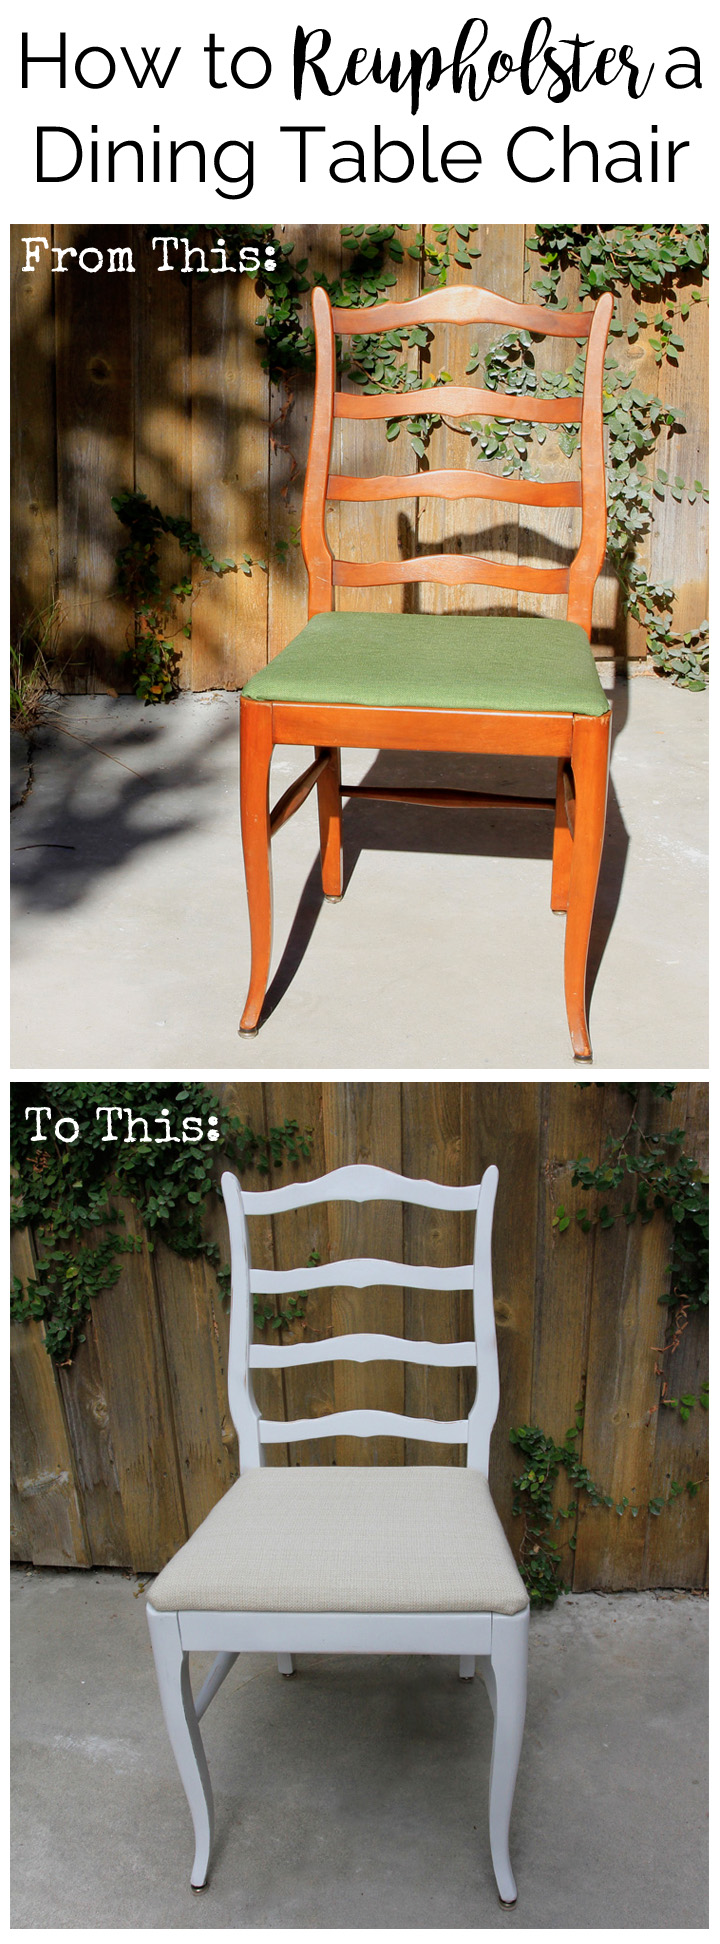 How to Reupholster a Dining Table Chair | Create Pray Love